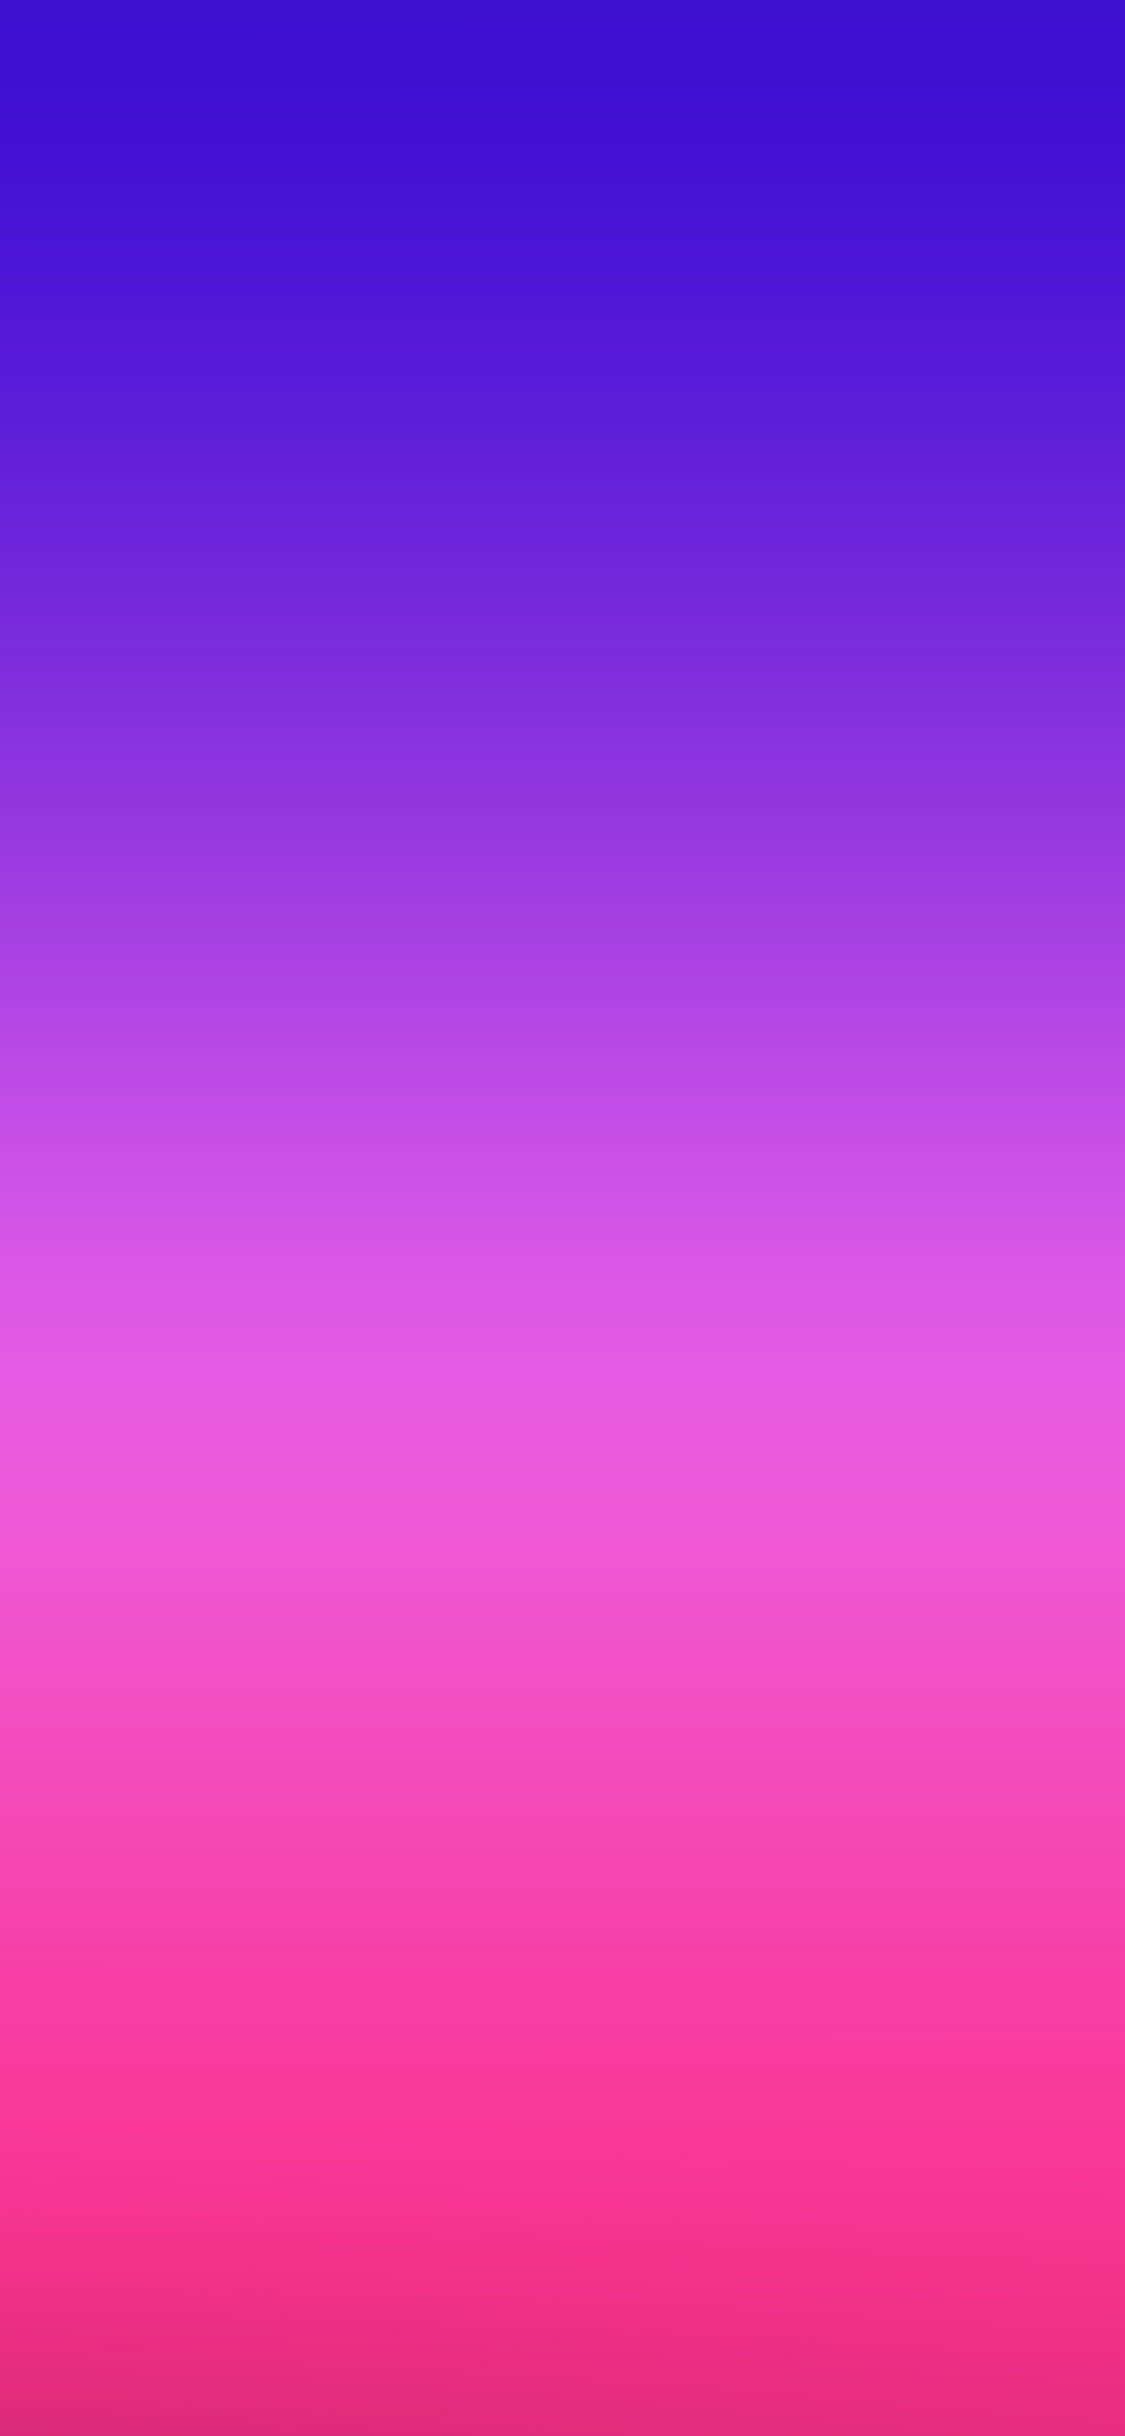 Vibrant Pink iPhone background for a stunning custom look